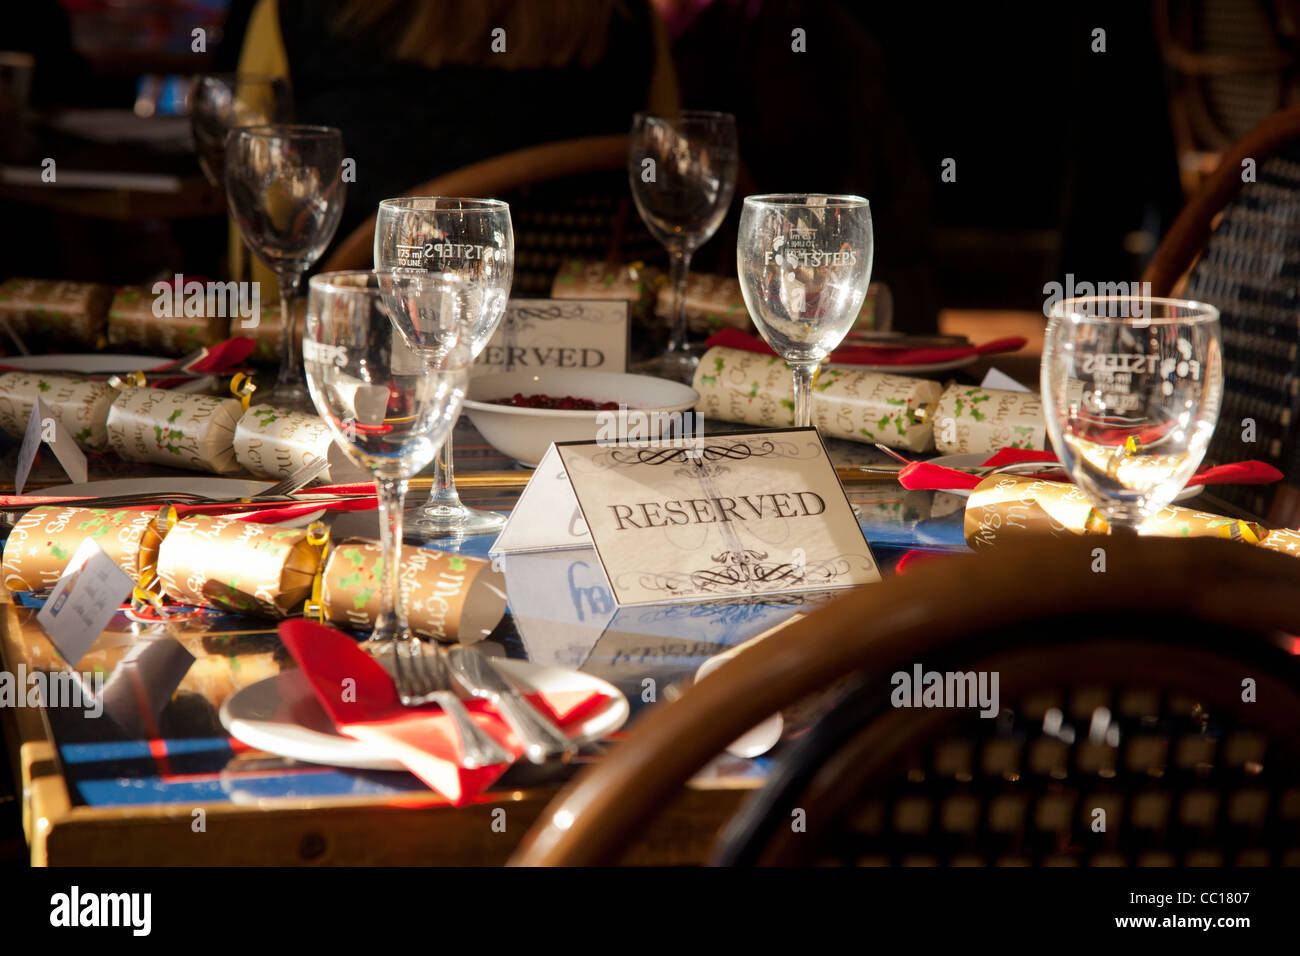 A restaurant table laid for a party with reserved label. Stock Photo